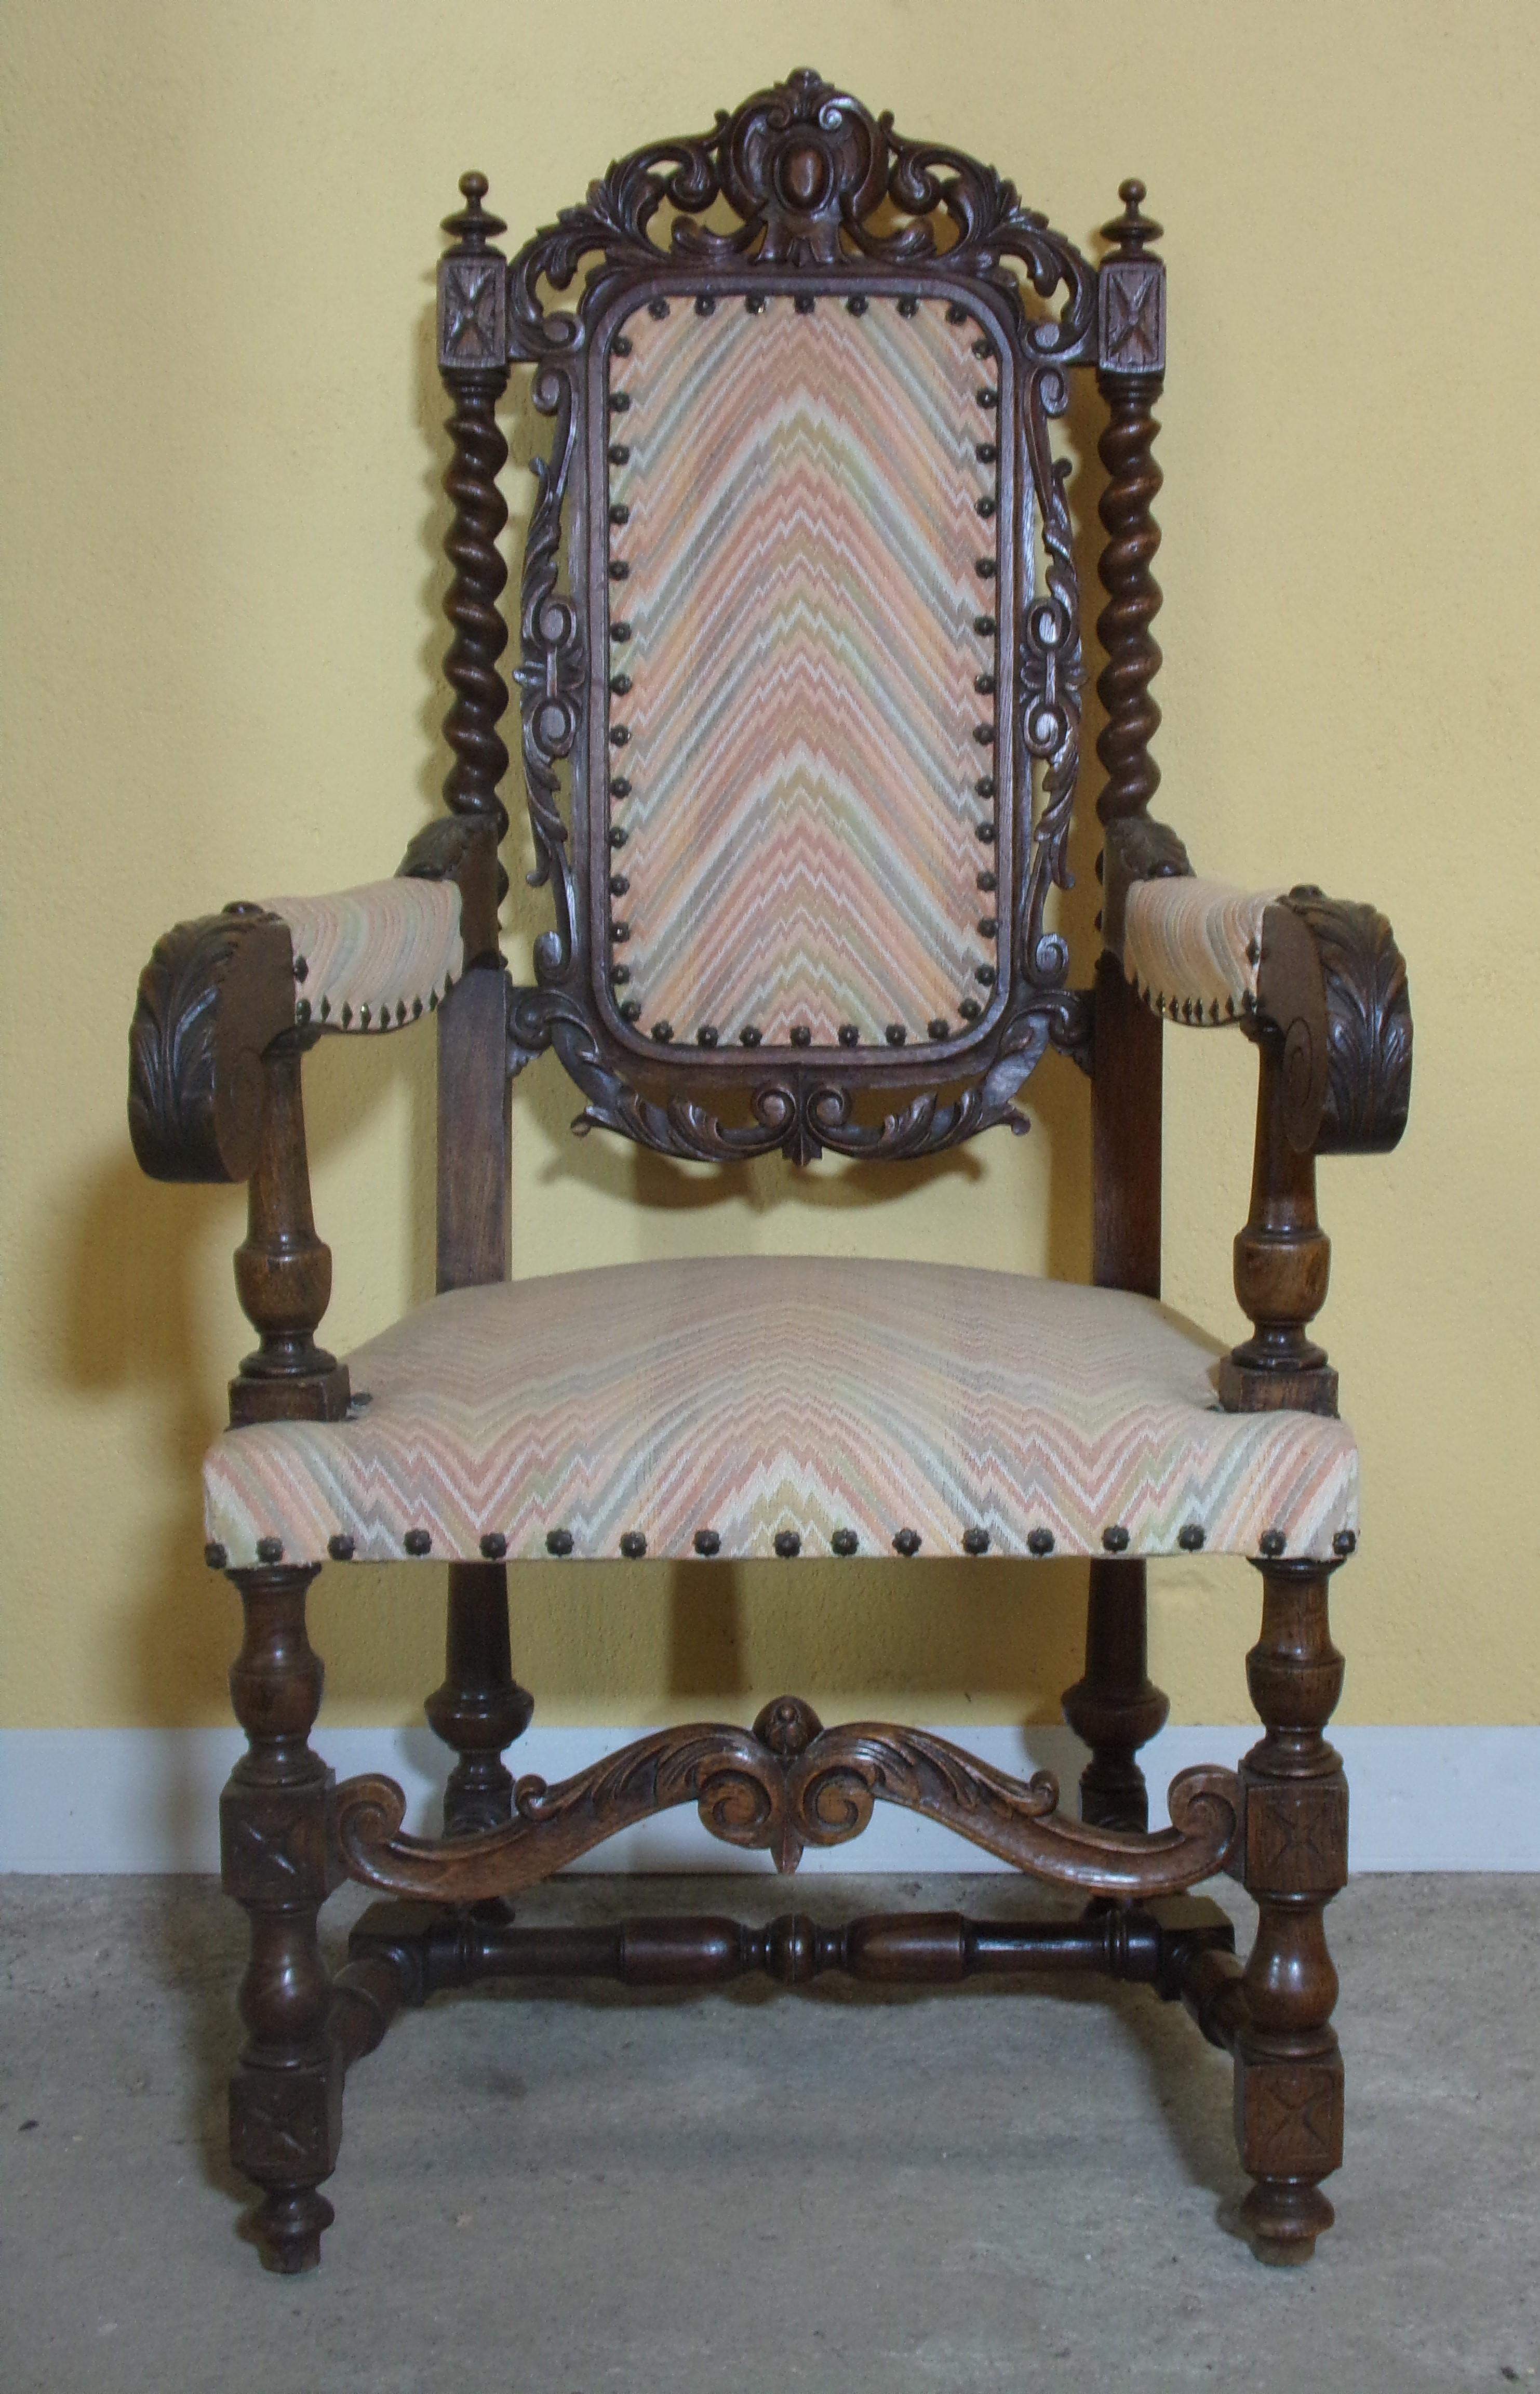 A good pair of solid carved oak Renaissance Revival Throne arm chairs C1880 beautifully hand carved and in excellent condition both frames and upholstery.